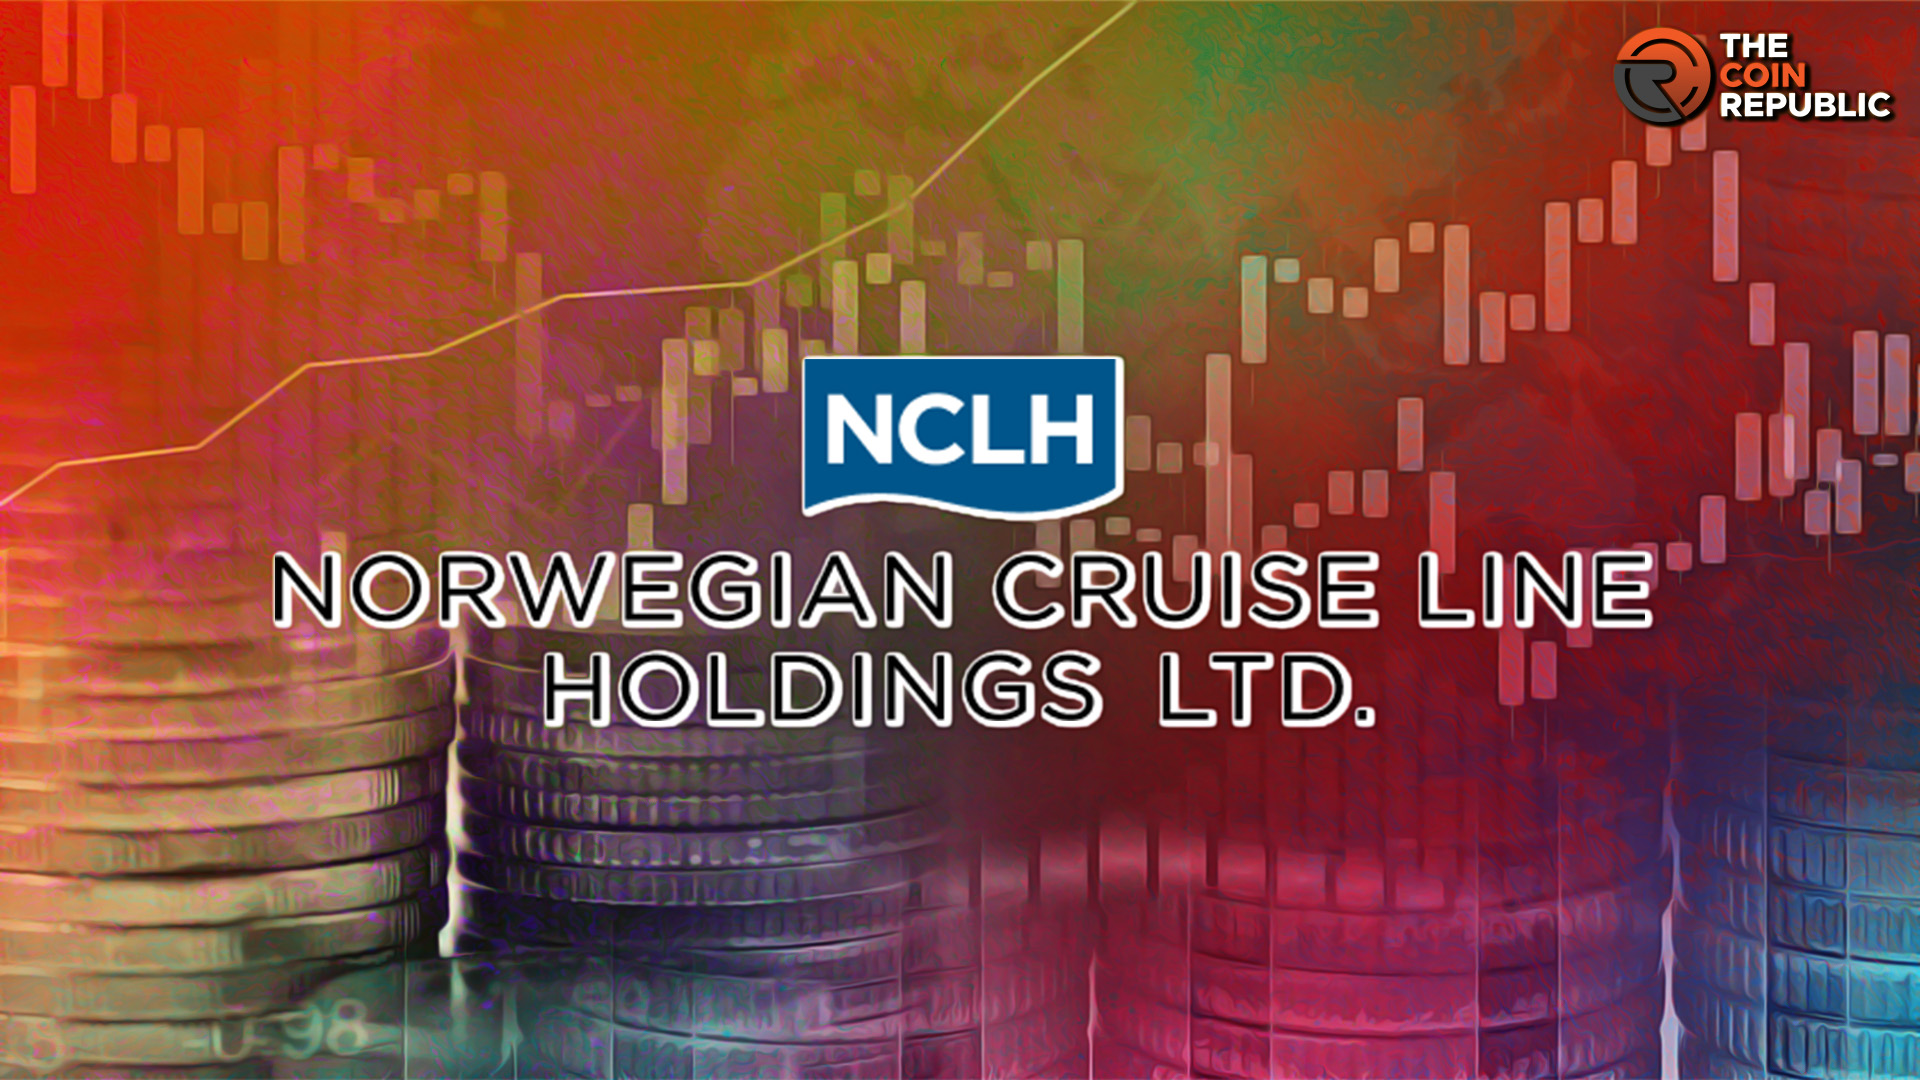 NCLH Stock Price Sloping Down Below its 100day Moving Average